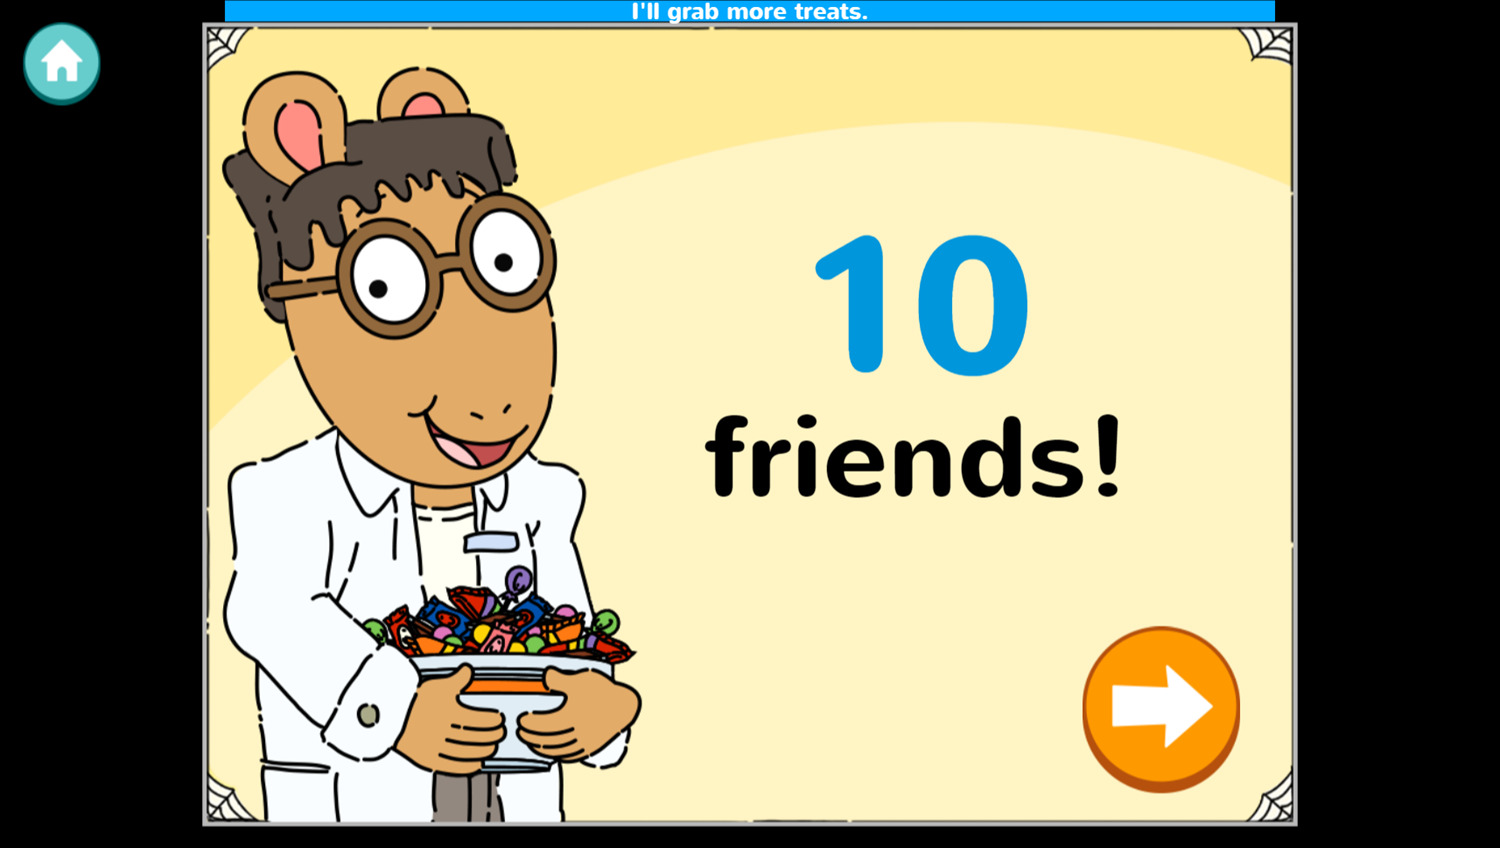 Arthur's Tricks and Treats Game Level Complete Screenshot.